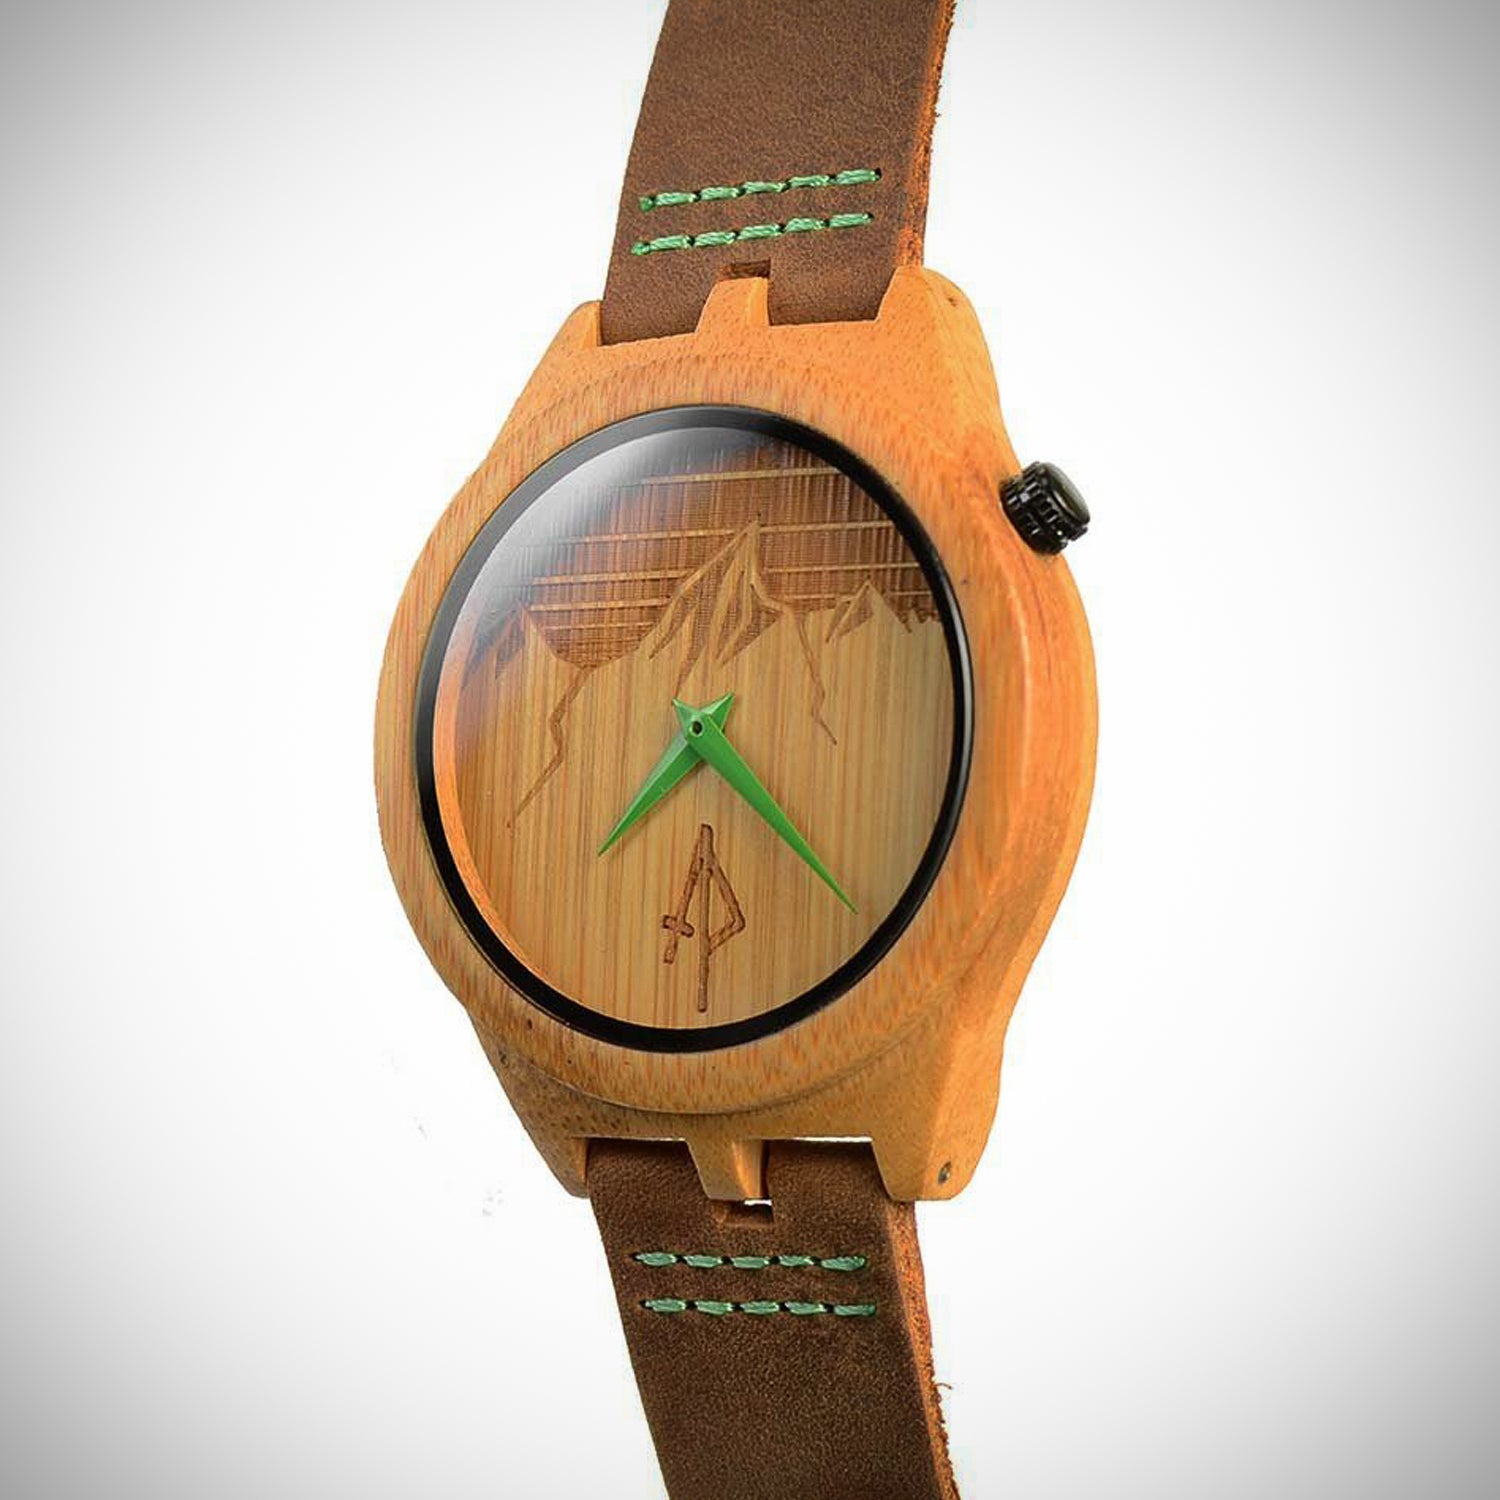 ⇨ Bamboo Watches - Eco Friendly Wood Watches - Products of Bamboo